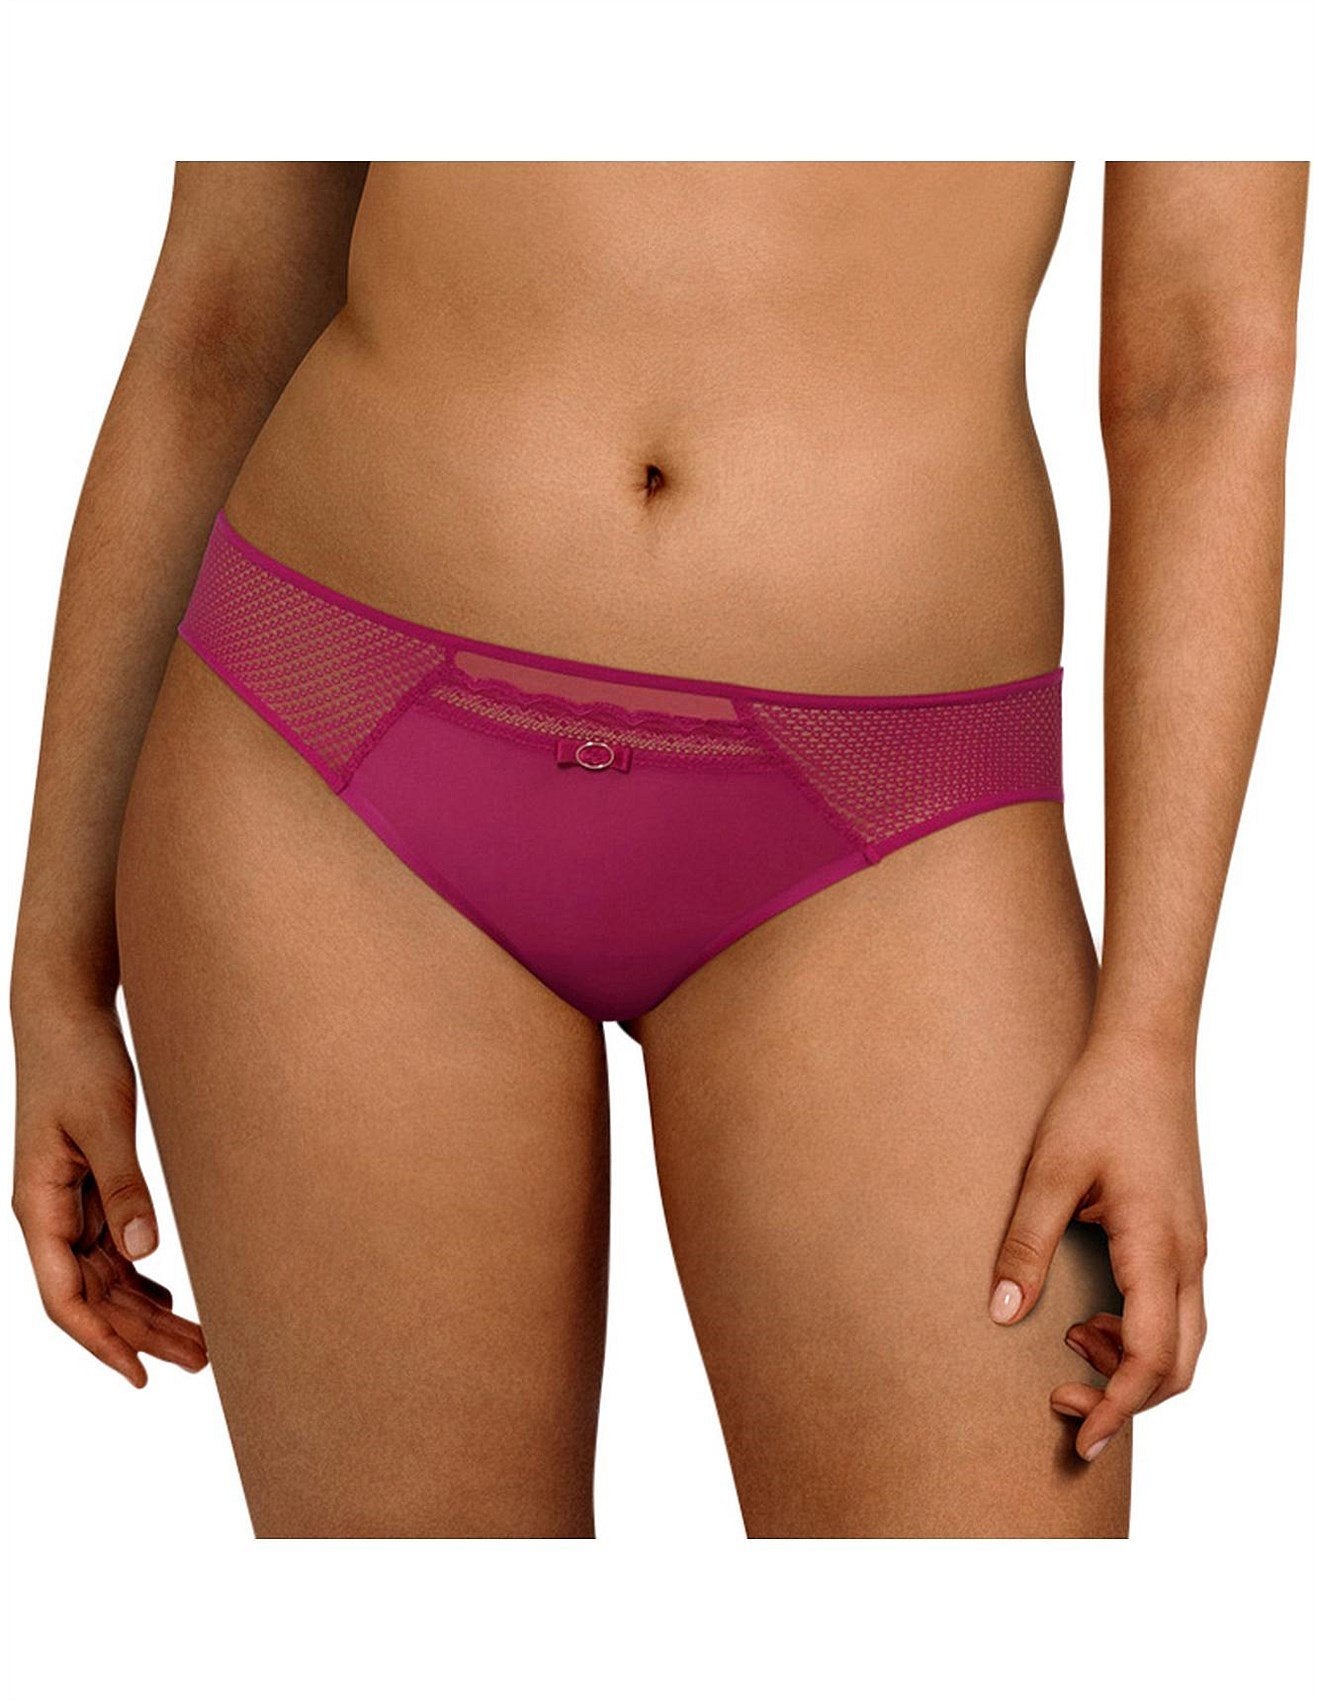 Chantelle Parisian Allure Brief C22330 - Briefs Ruby / 8 / XS  Available at Illusions Lingerie